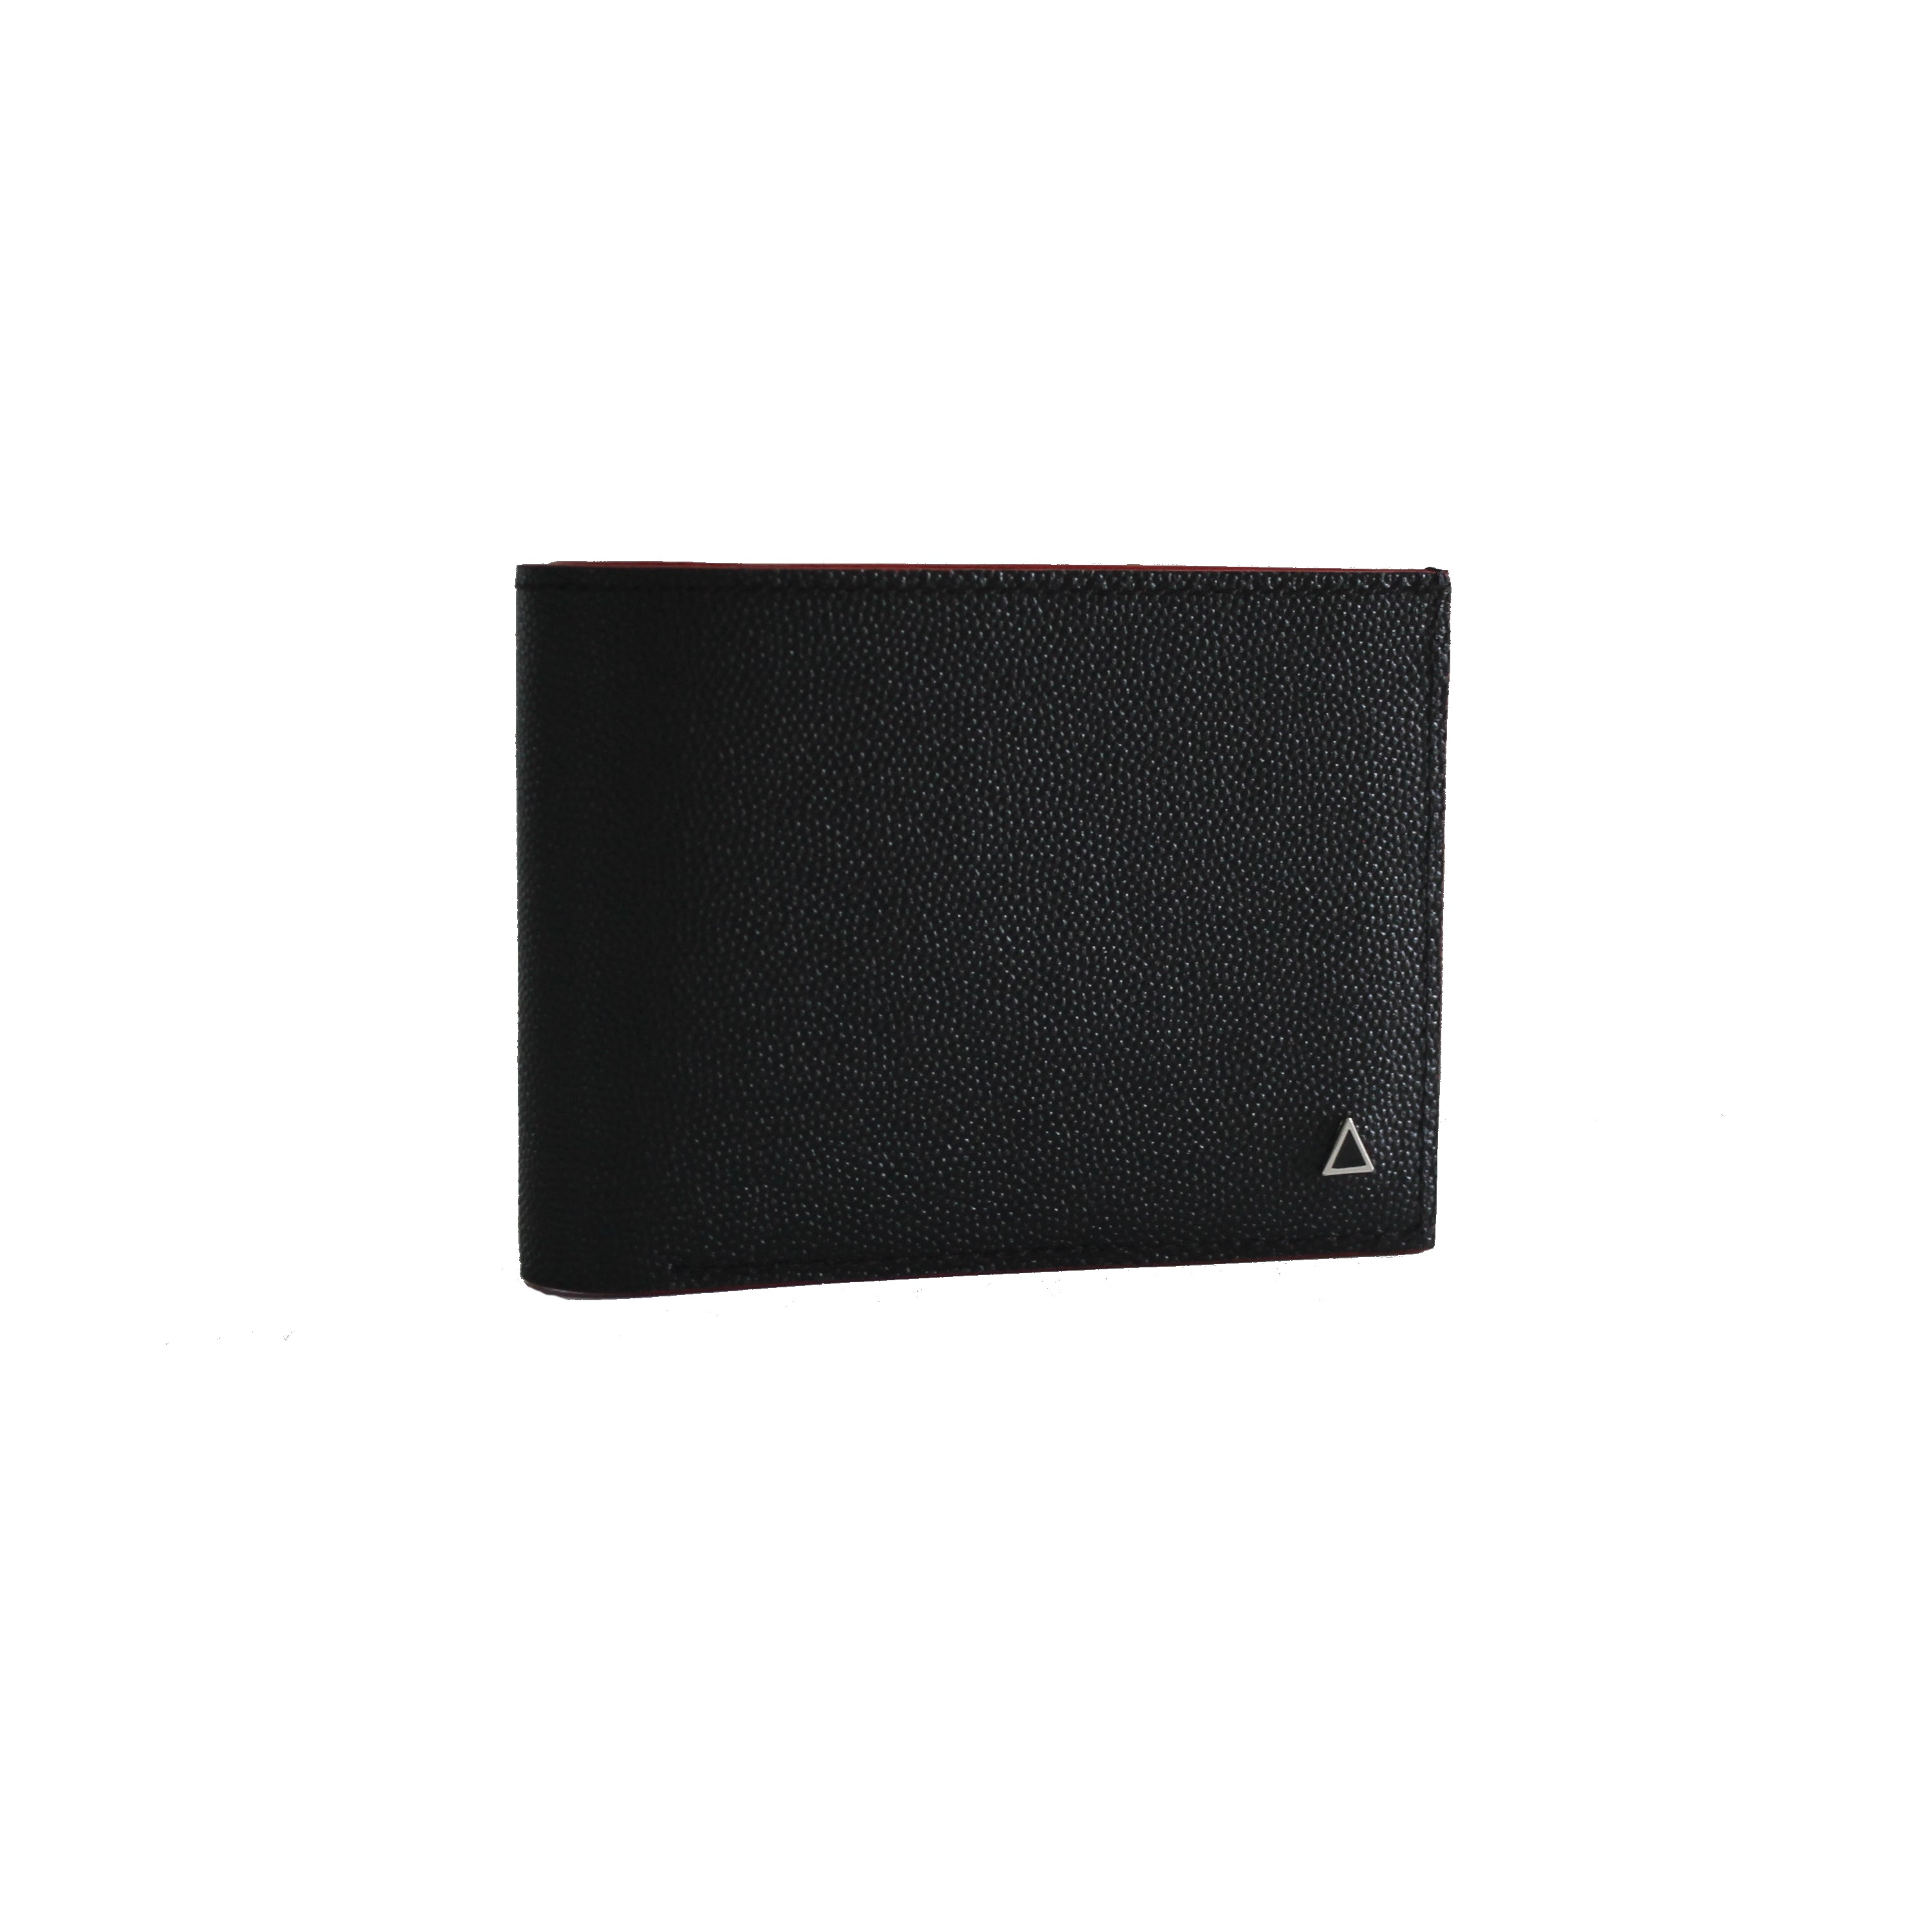 Made in FRANCE Tourny Luxury Wallet in Black Taurillon by Anonyme Pari - La  Perfection Louis